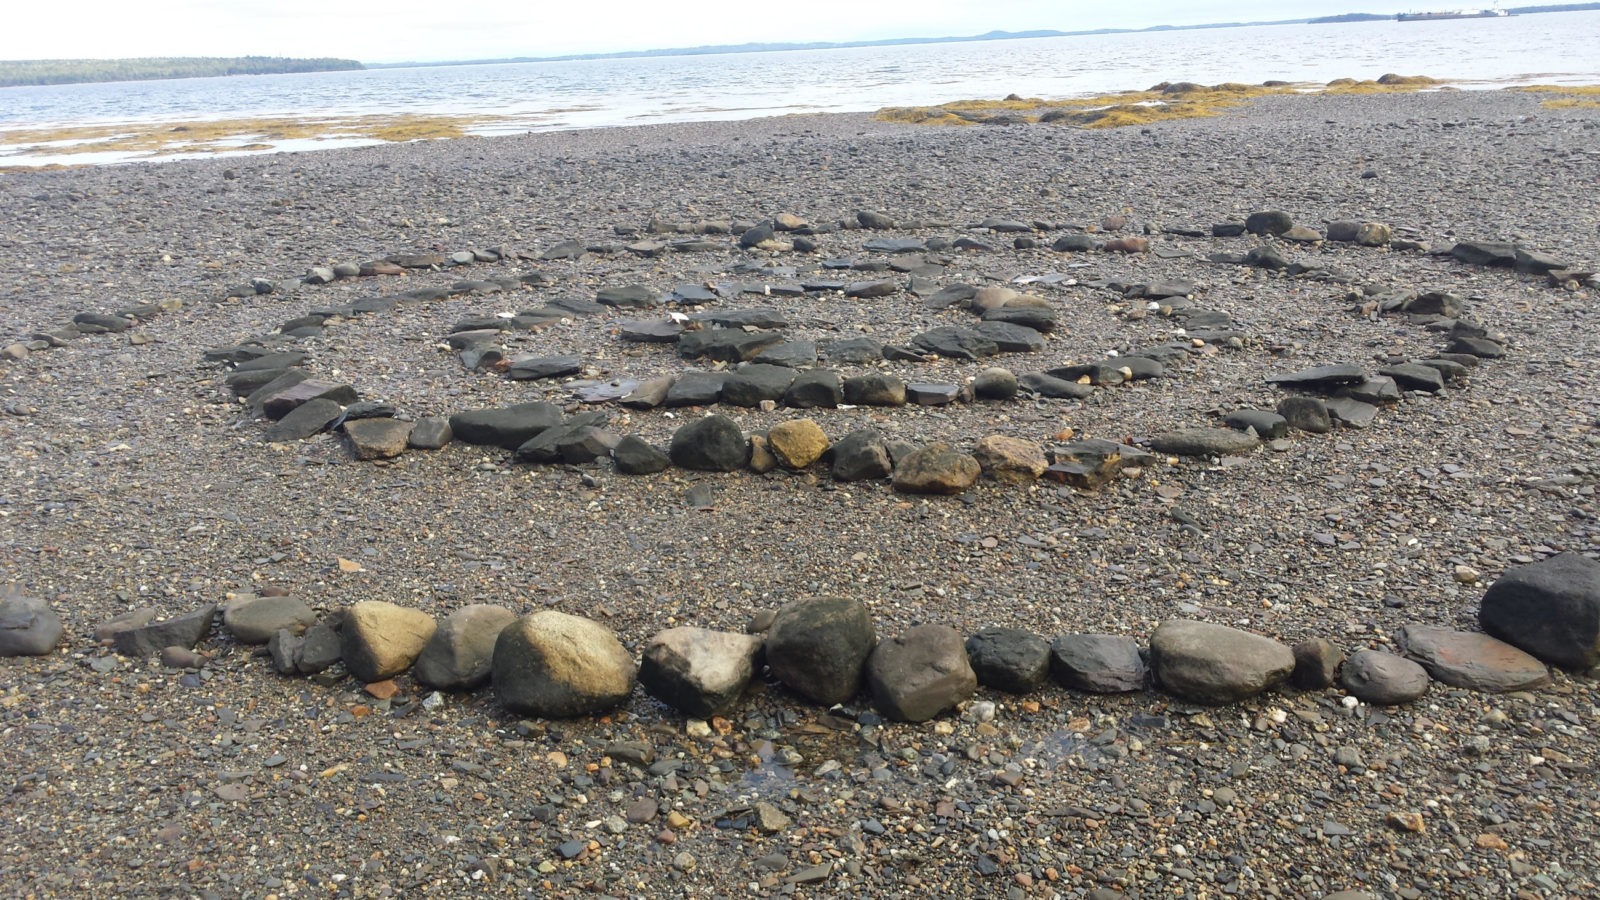 Labyrinth on the floor of Penobscot Bay